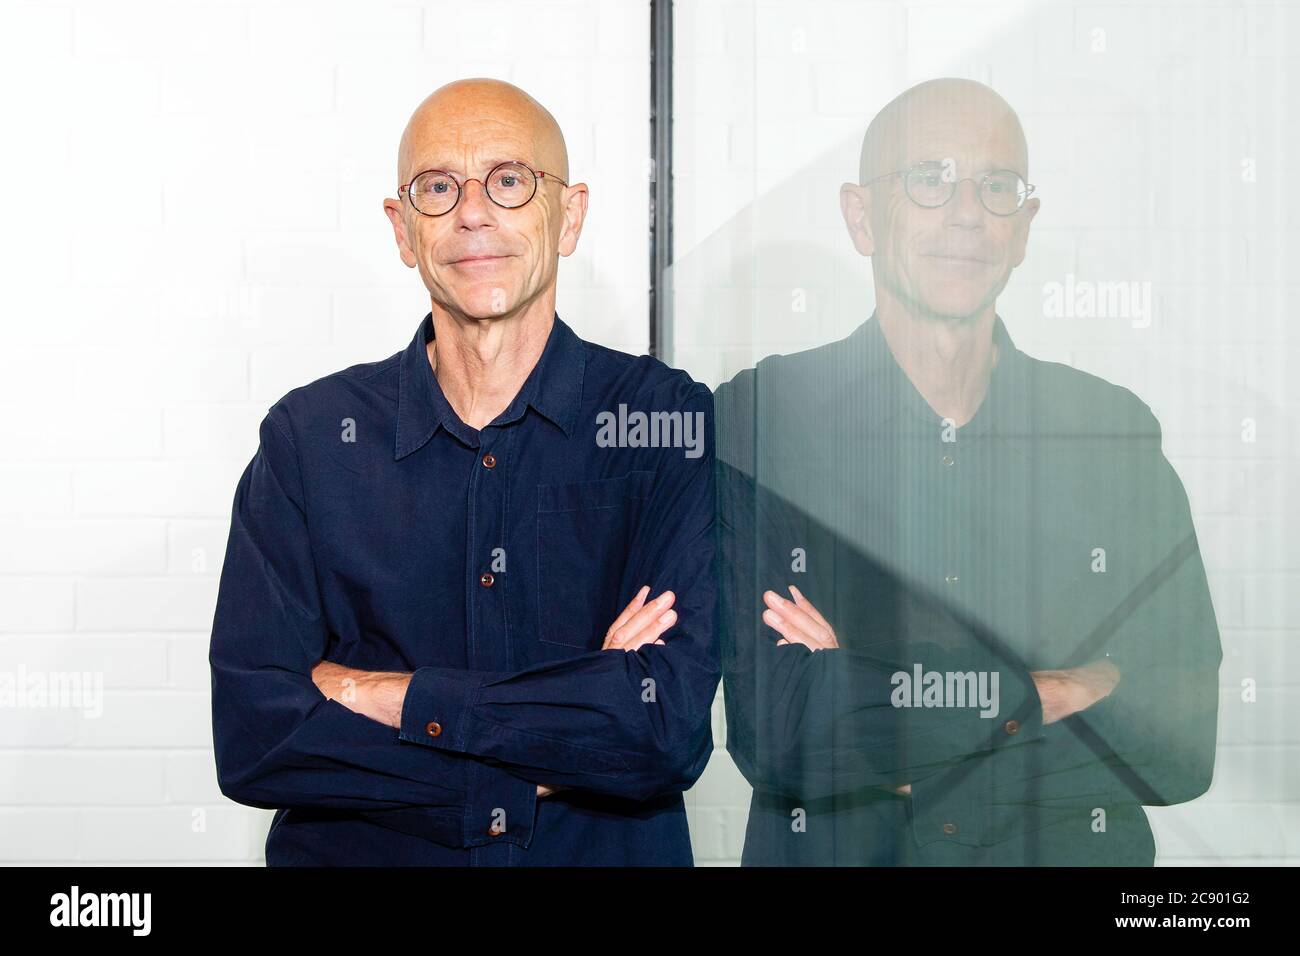 Peter cameron writer hi-res stock photography and images - Alamy